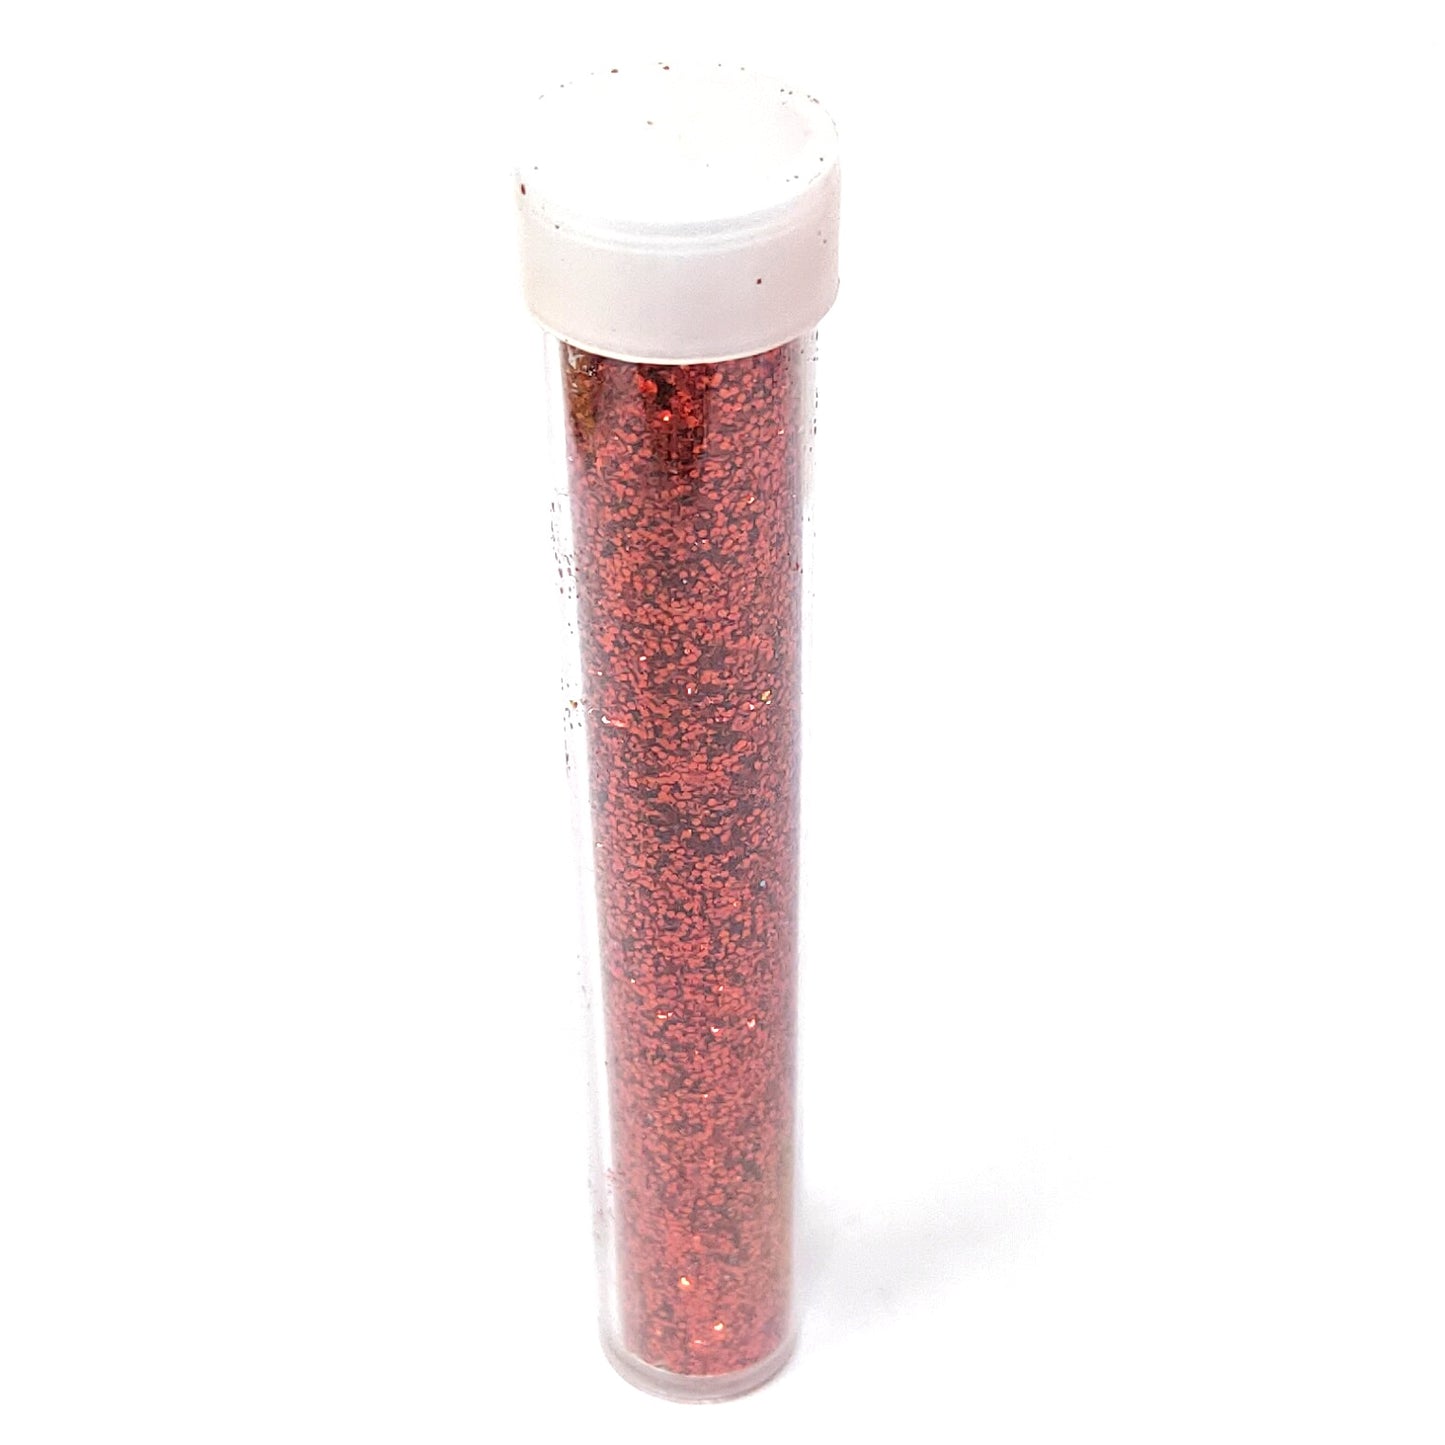 5 gram Red Glitter for Arts and Crafts, Scrapbooking, Paper Decorations and Other Activities (003)